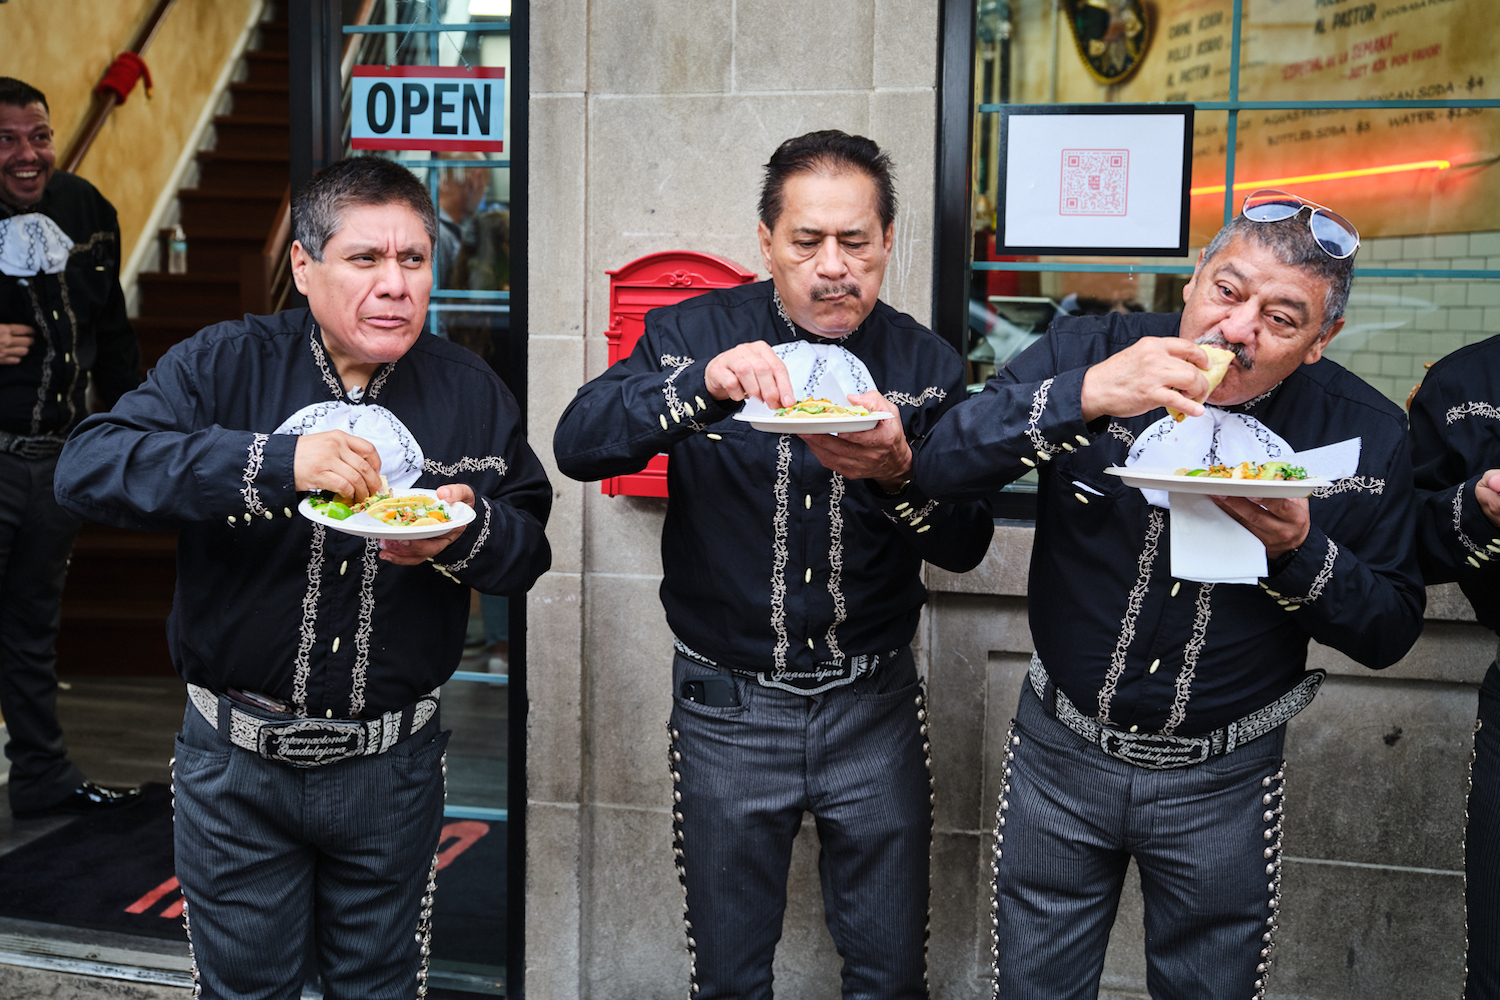 Group of men eating a tacos outside